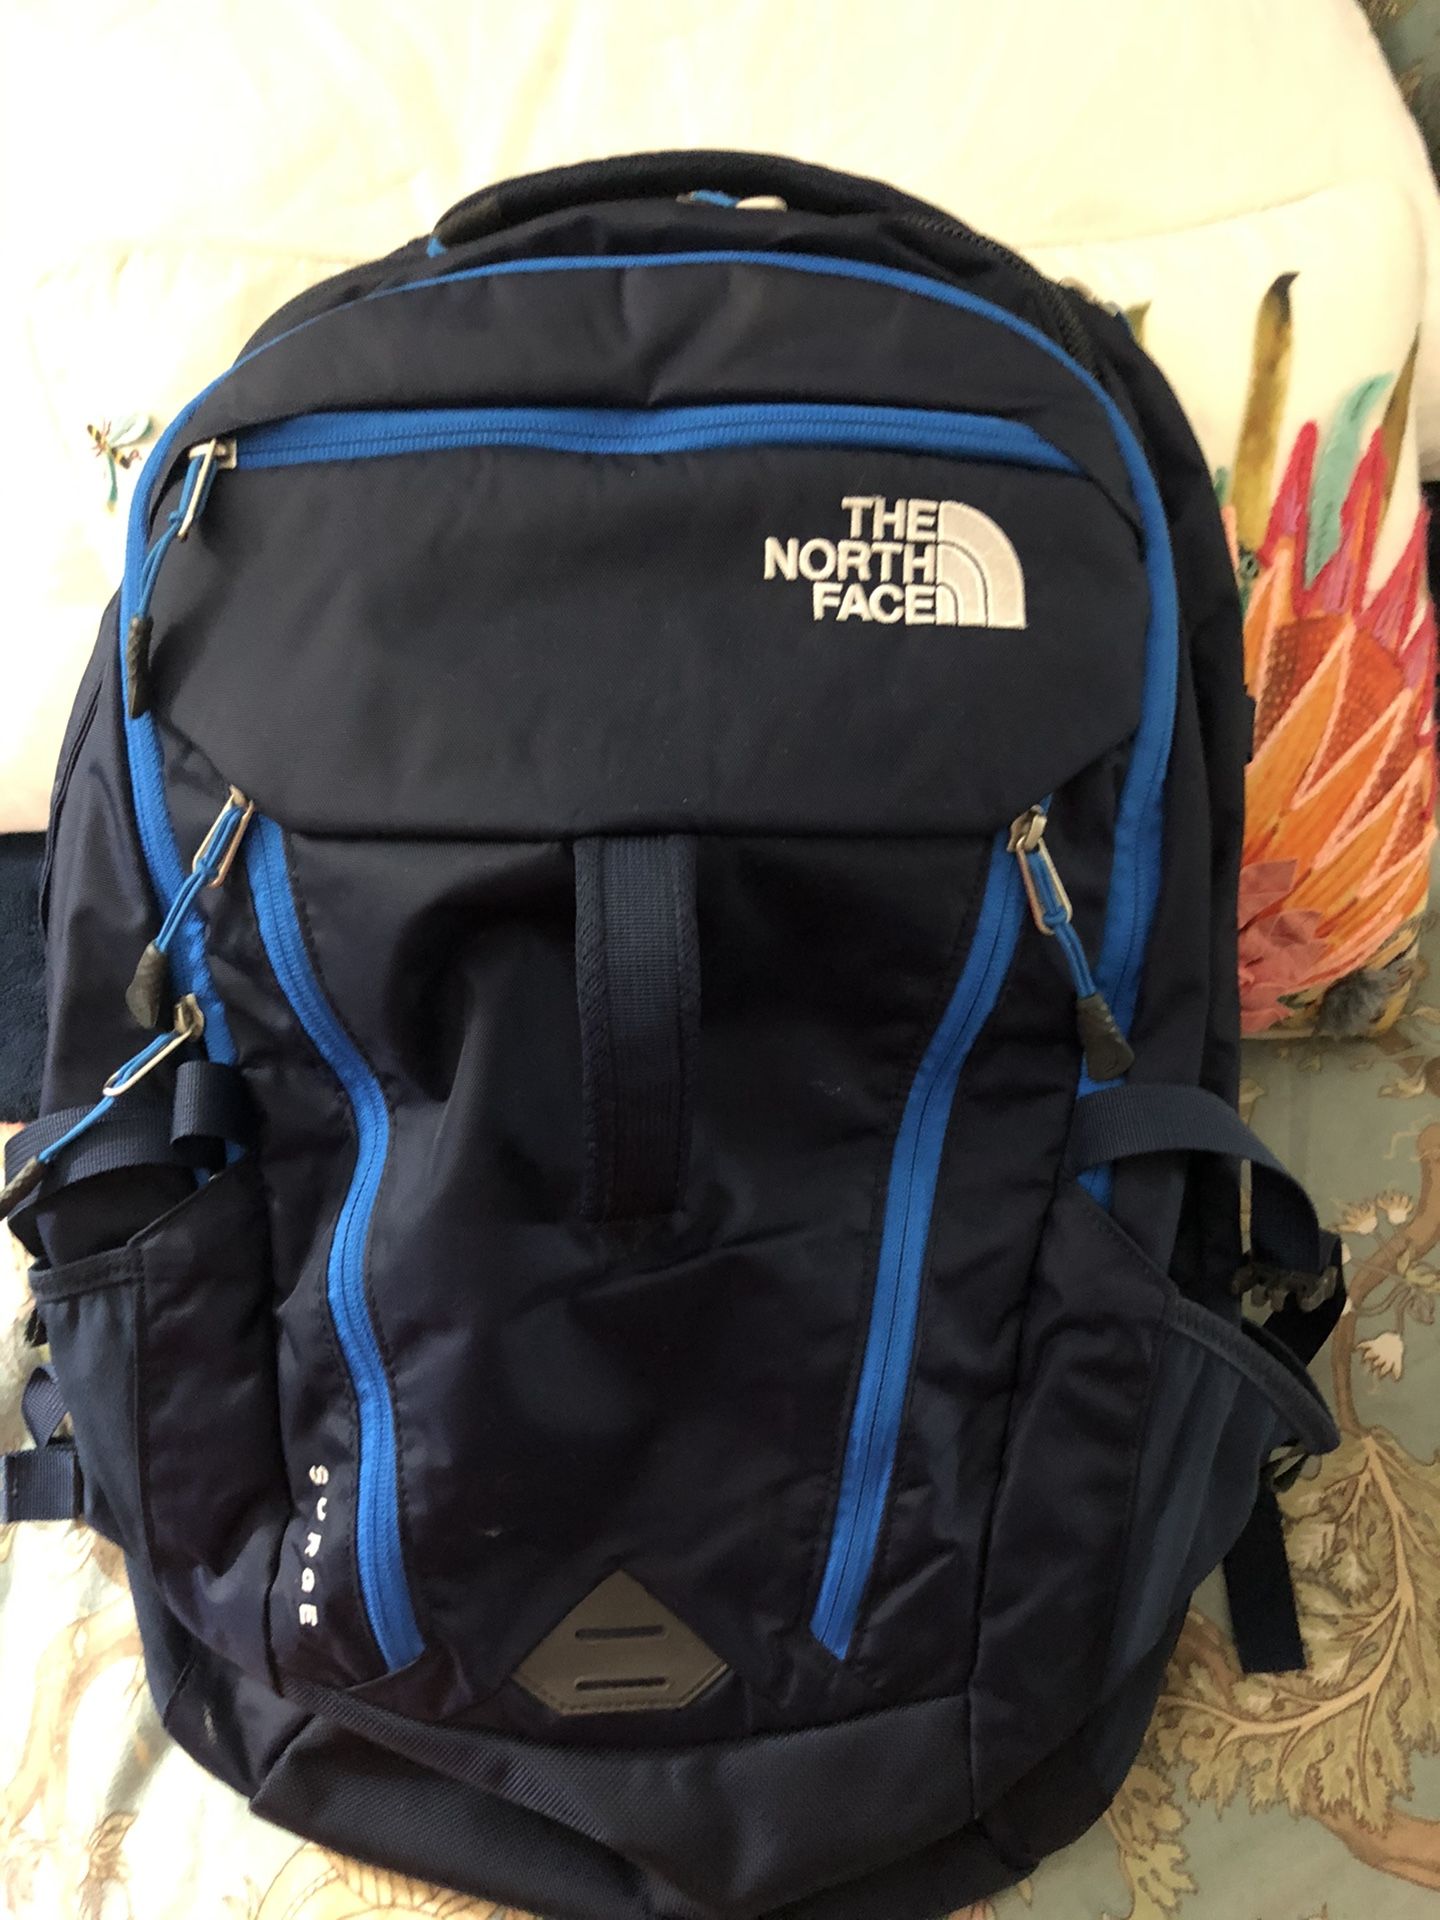 The north face backpack condition like new